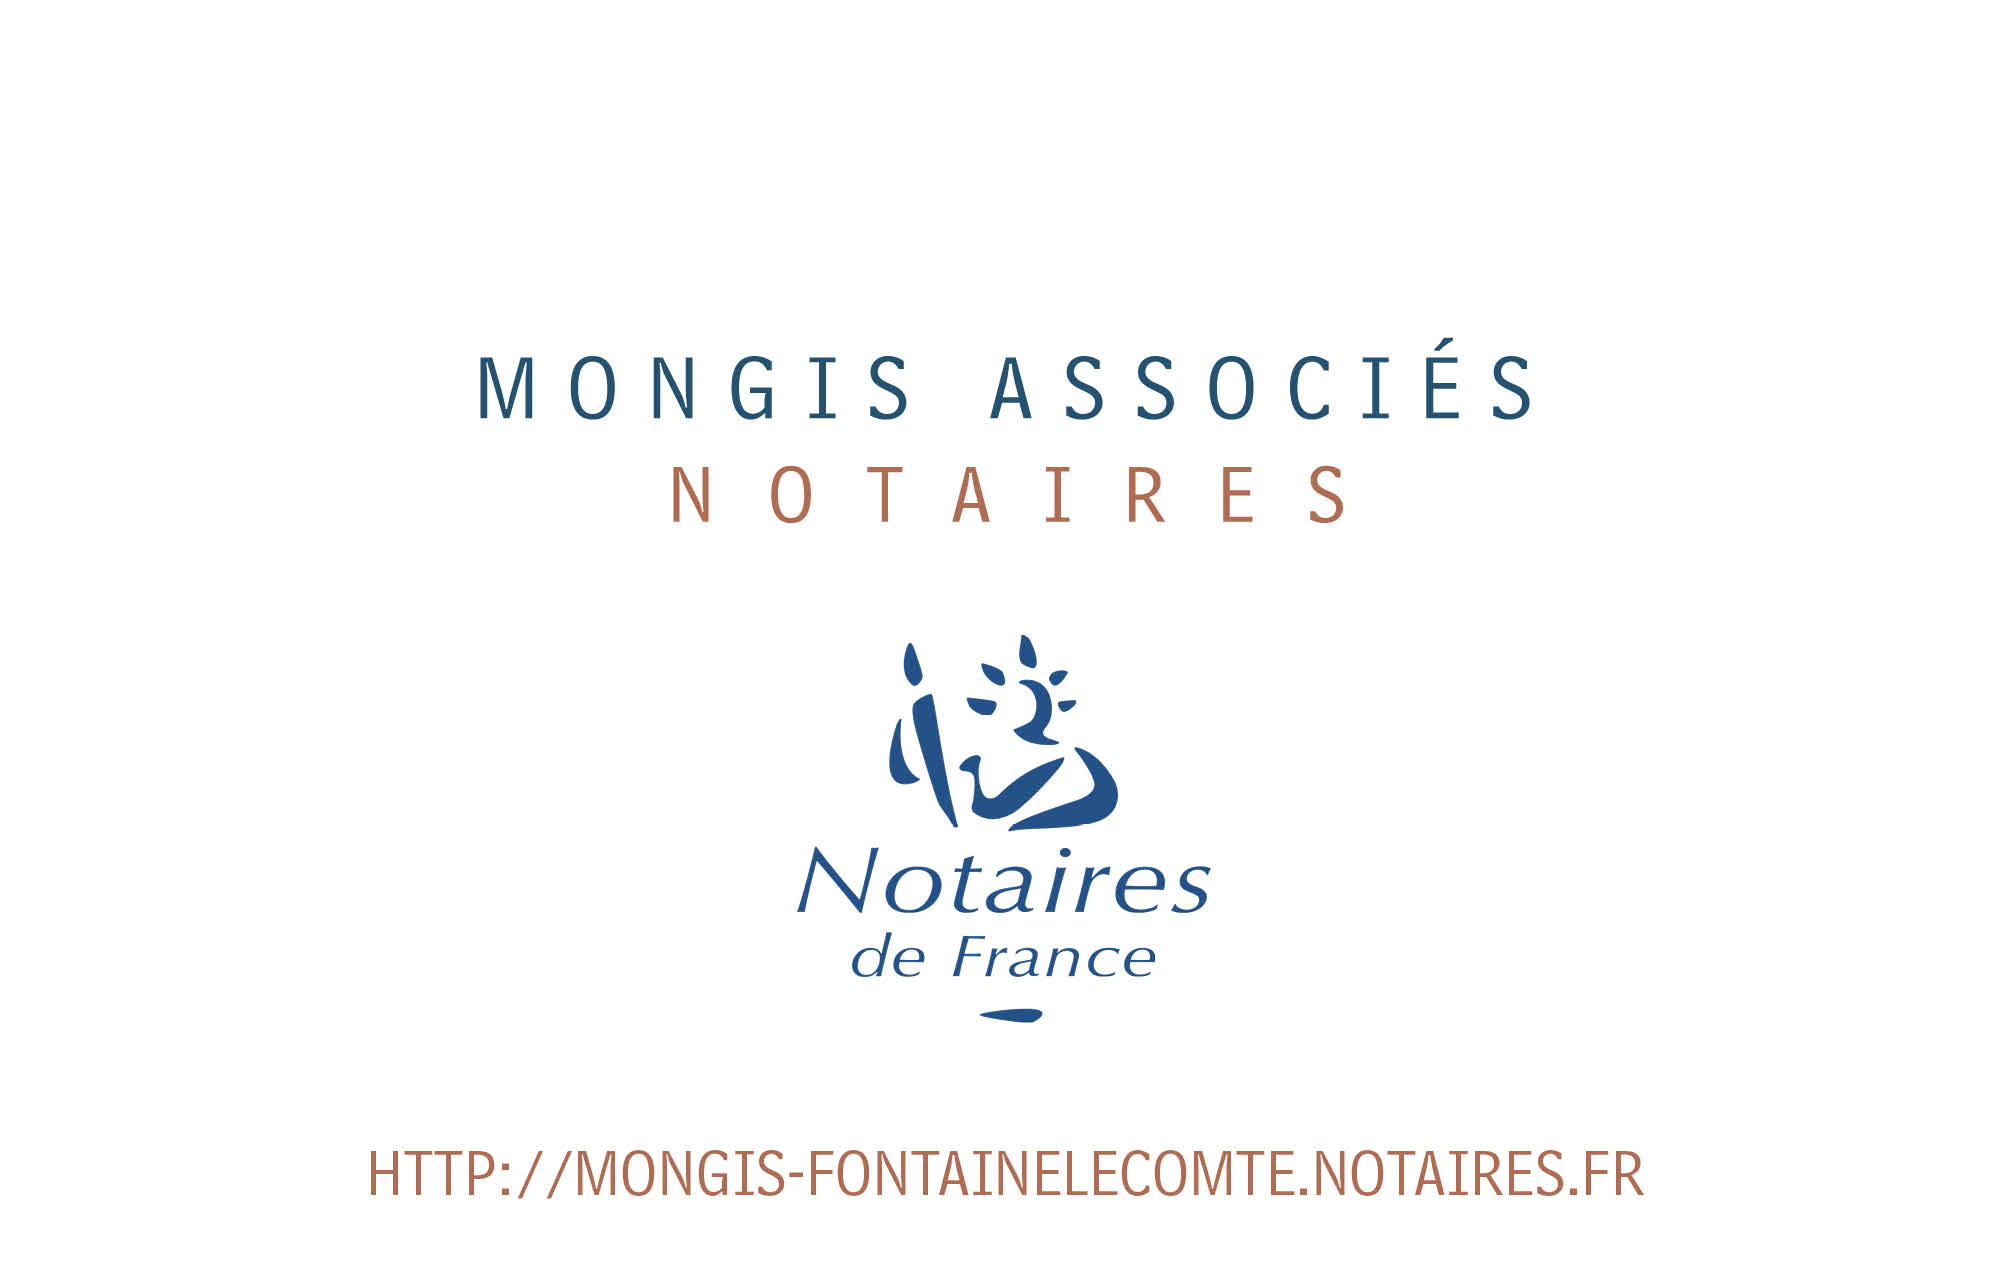 MONGIS NOTAIRES